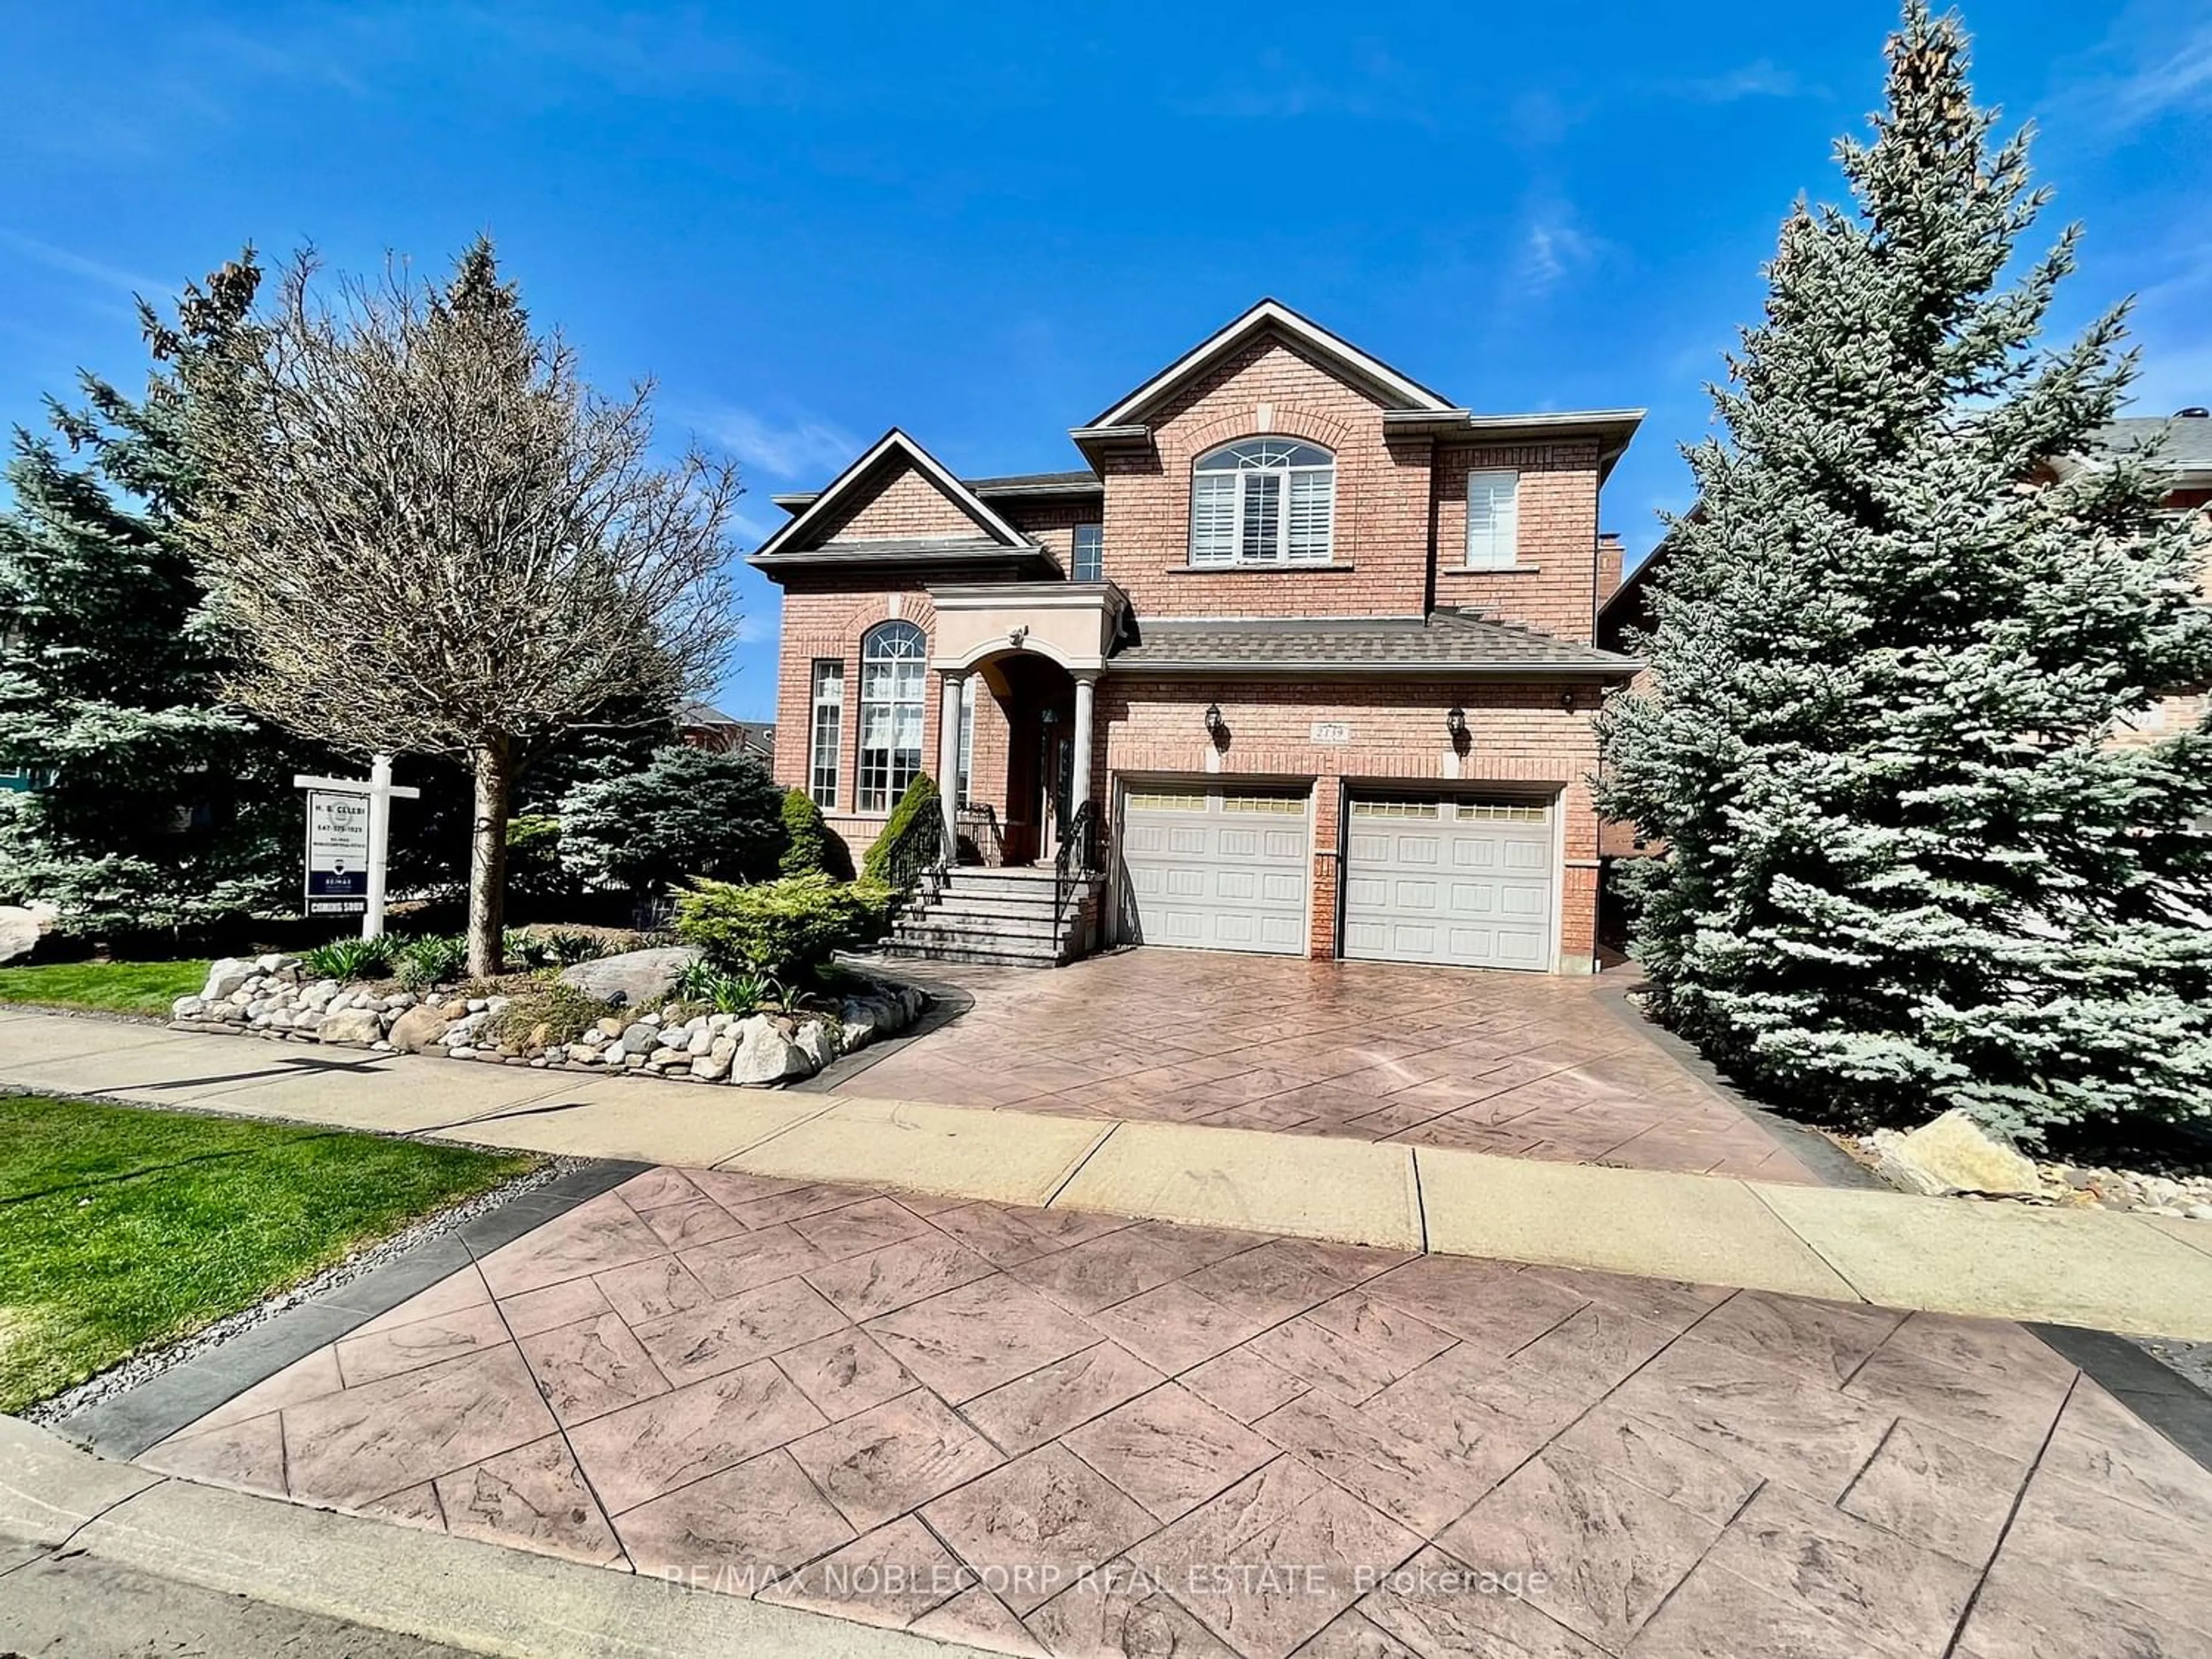 Home with brick exterior material for 2139 Helmsley Ave, Oakville Ontario L6M 4R6